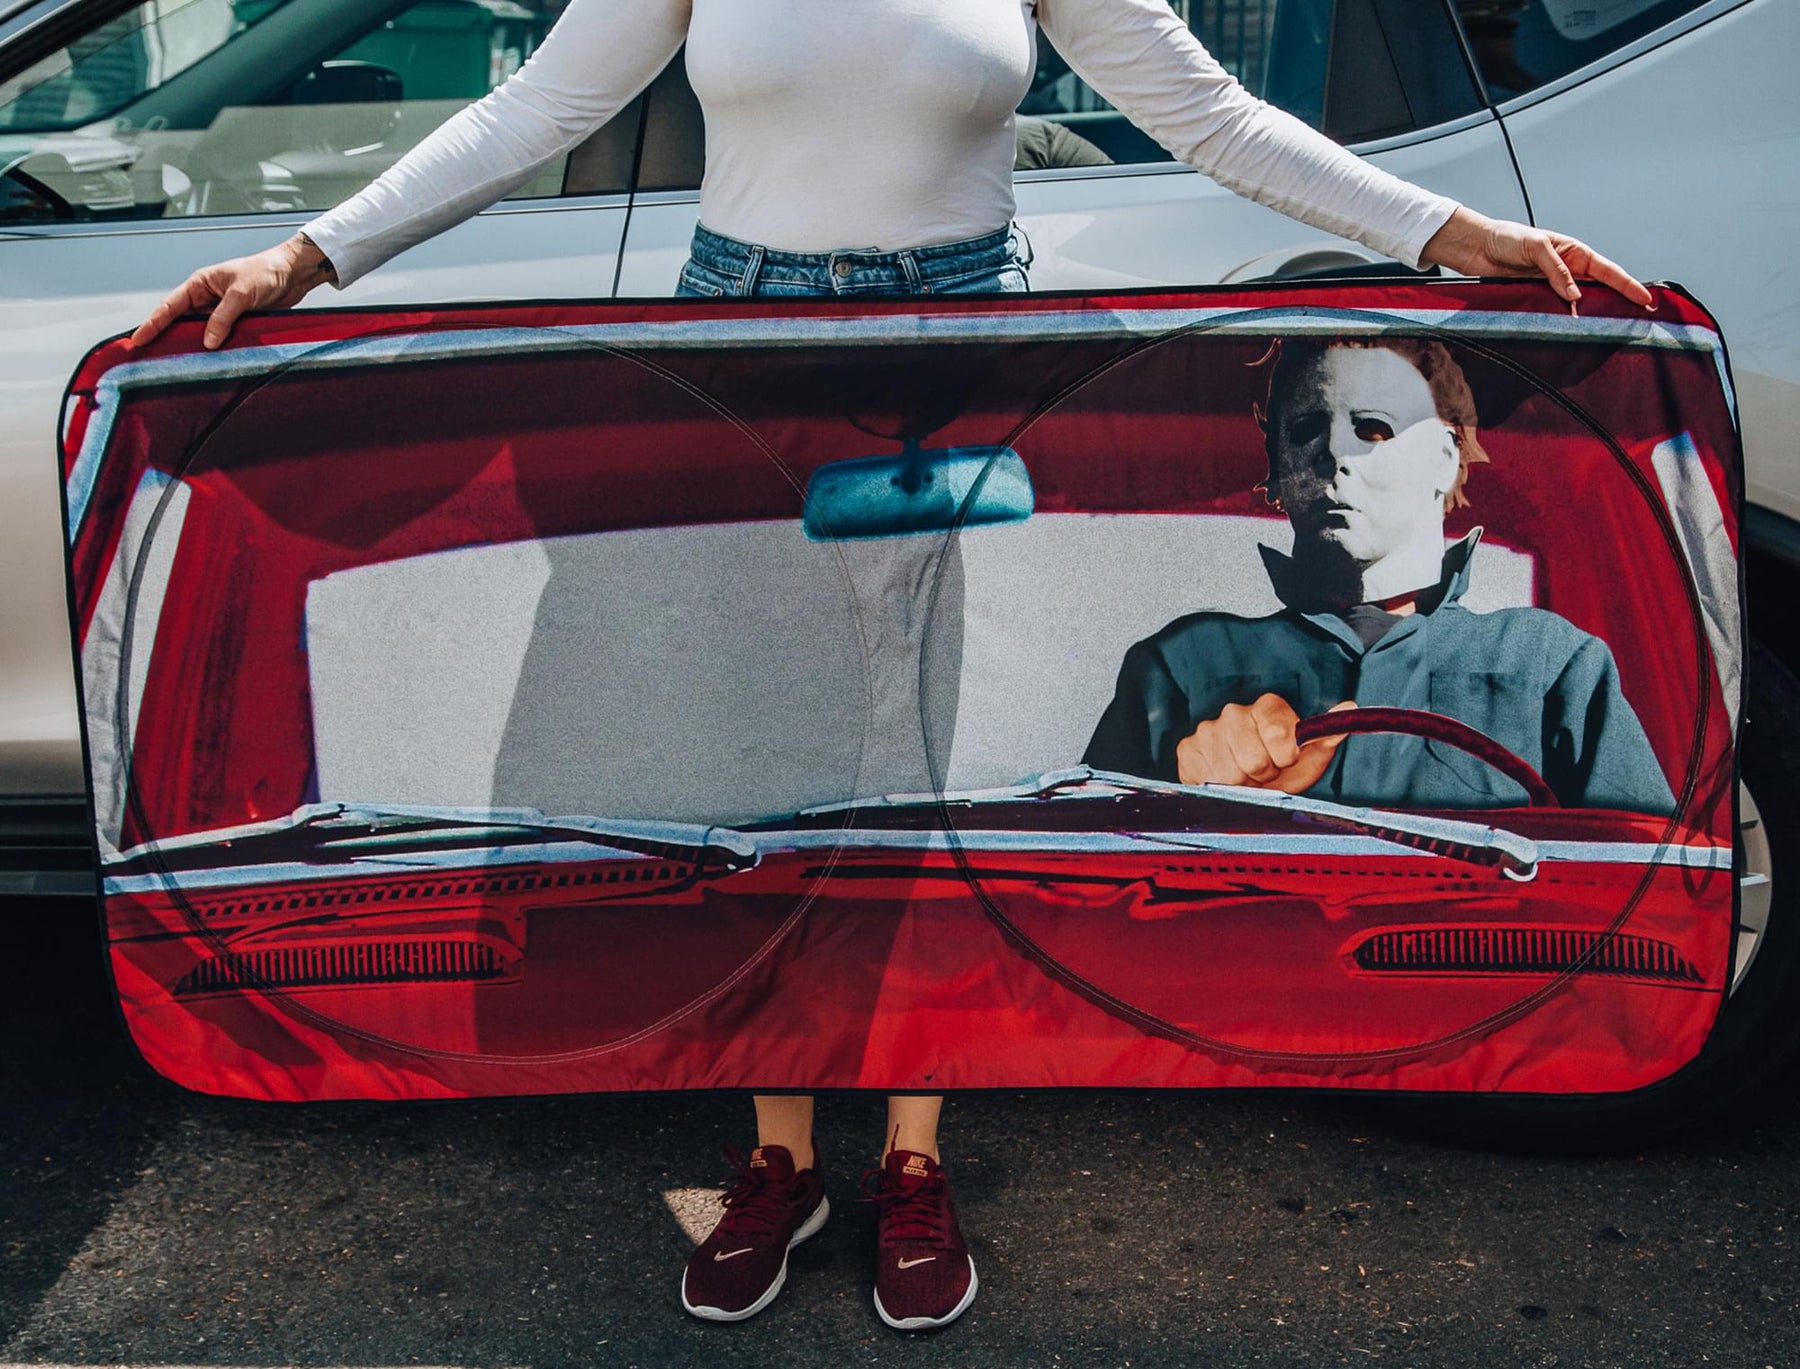 Halloween Michael Myers Sunshade for Car Windshield | 64 x 32 Inches